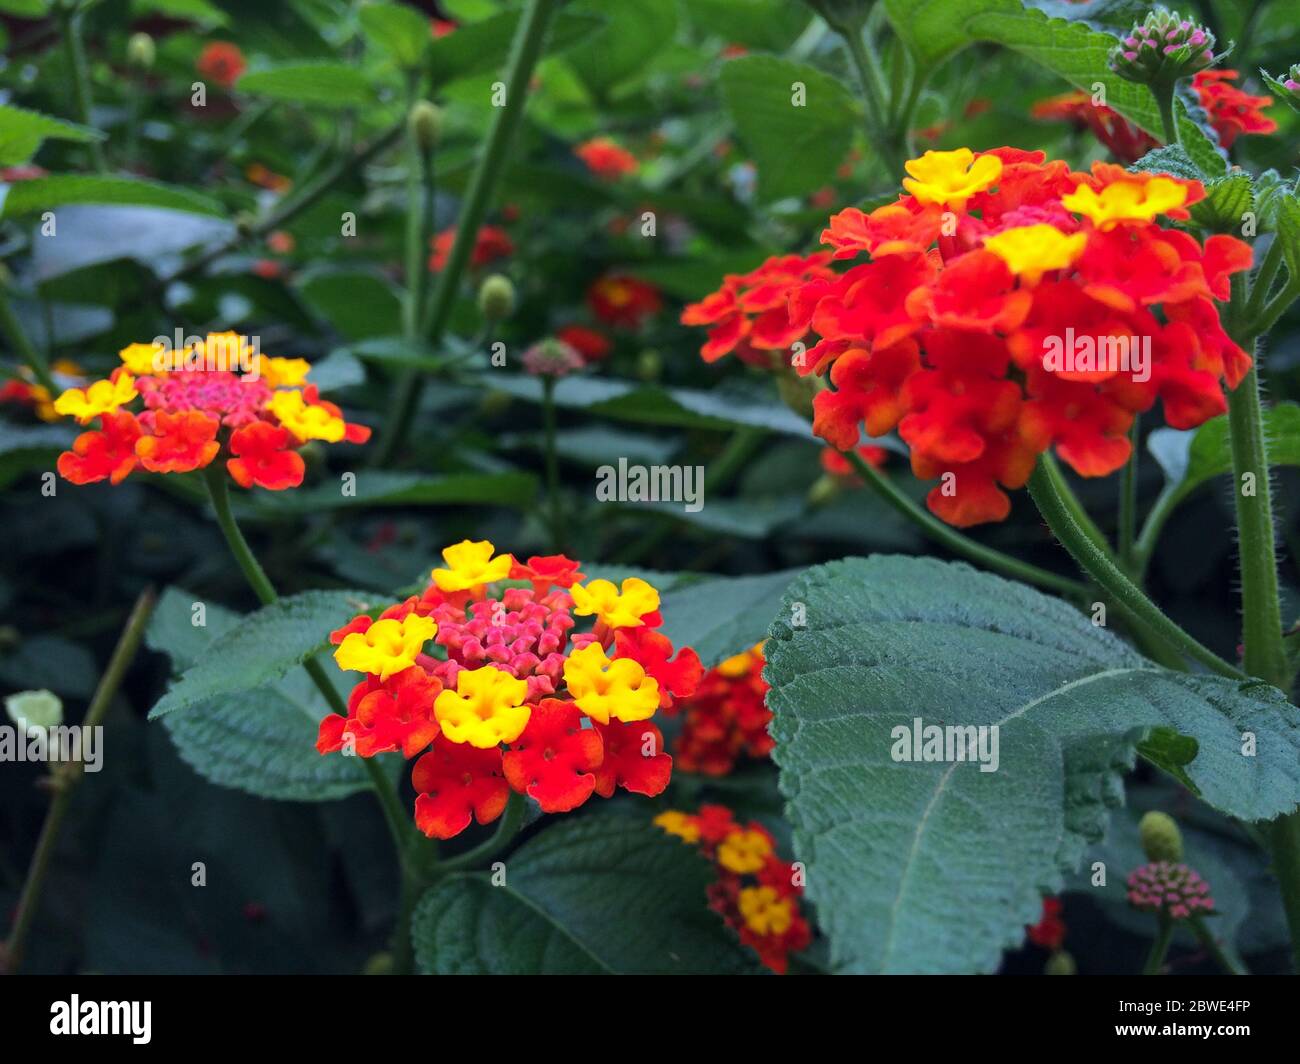 colorful flowers of  Verbene are blossomed in the garden. Red and yellow flowers of Verbena hybrida. Stock Photo